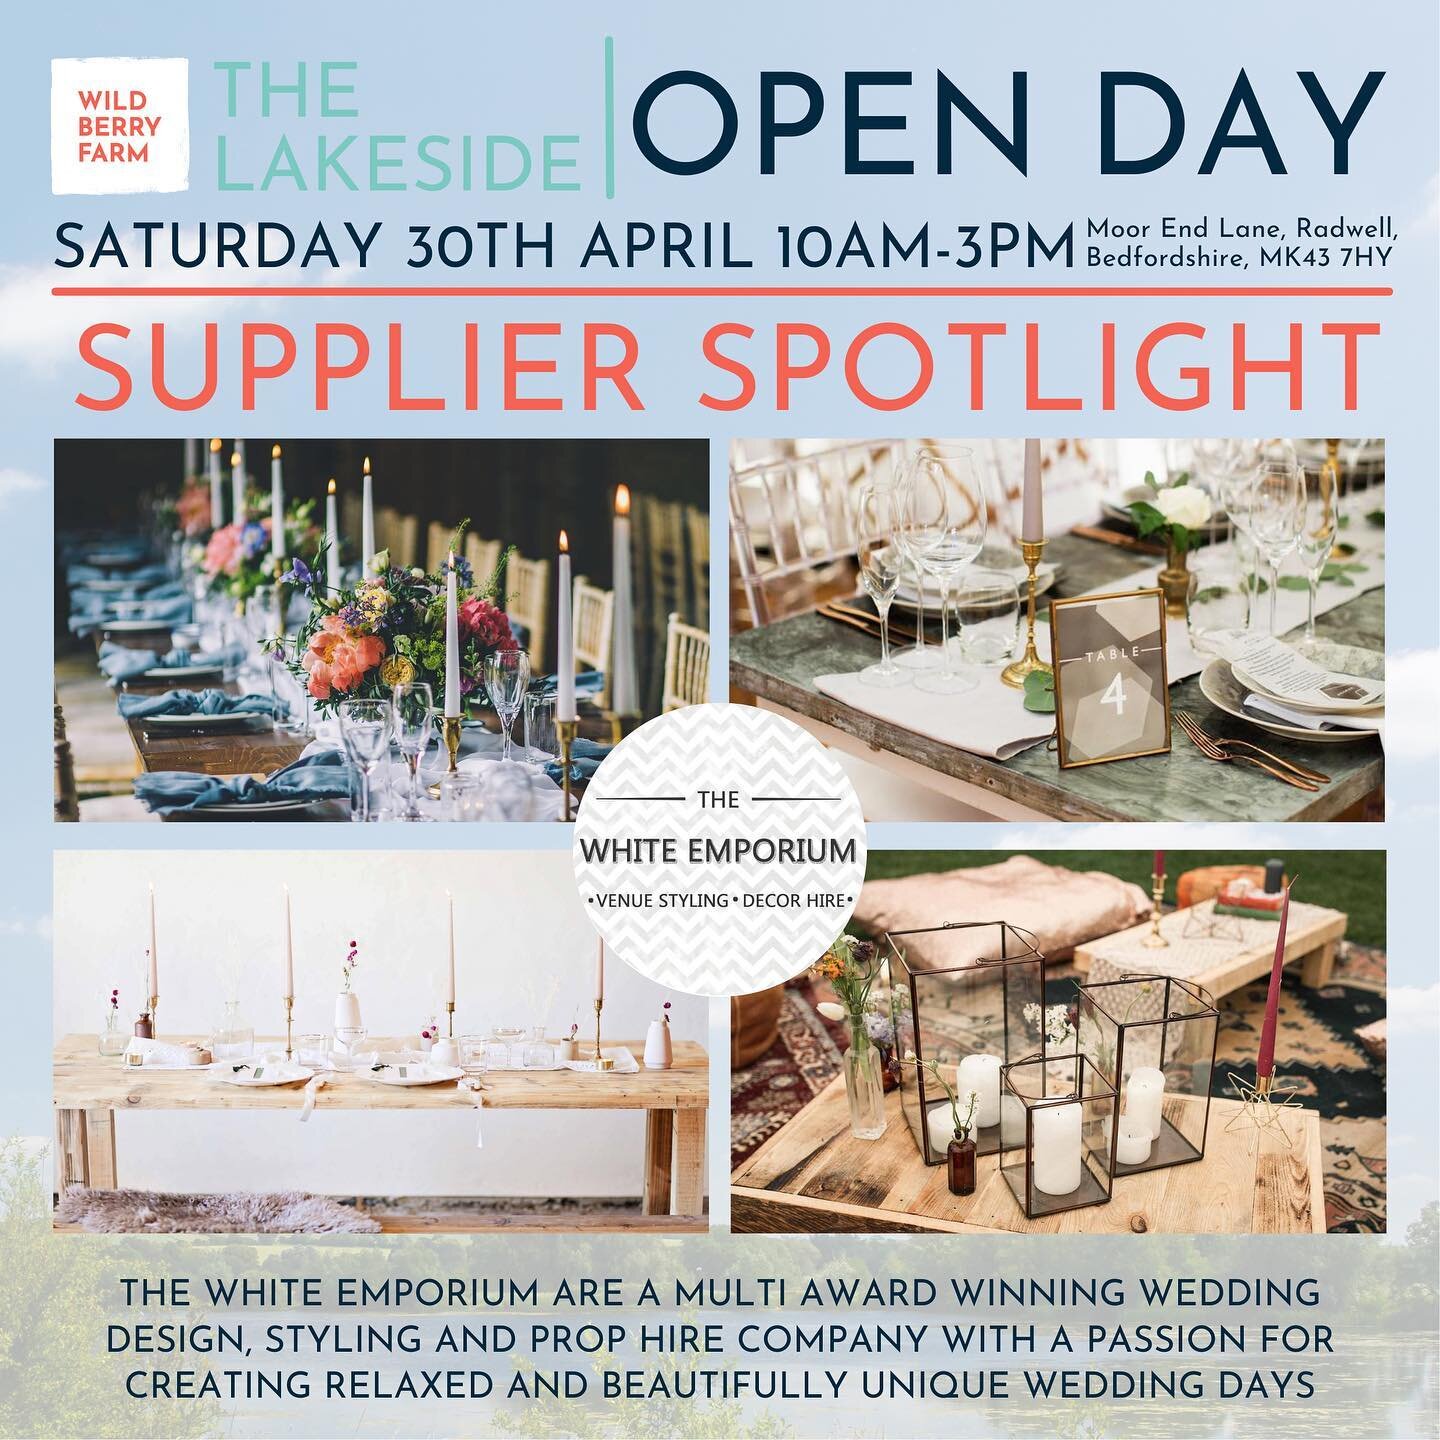 Supplier Spotlight | Gemma from the fabulous @thewhiteemporium, queen of wedding design, styling and gorgeous prop hire, will be waving her magic wand over multiple areas here at The Lakeside next Saturday 😃 

With creative vision and a knack for tr